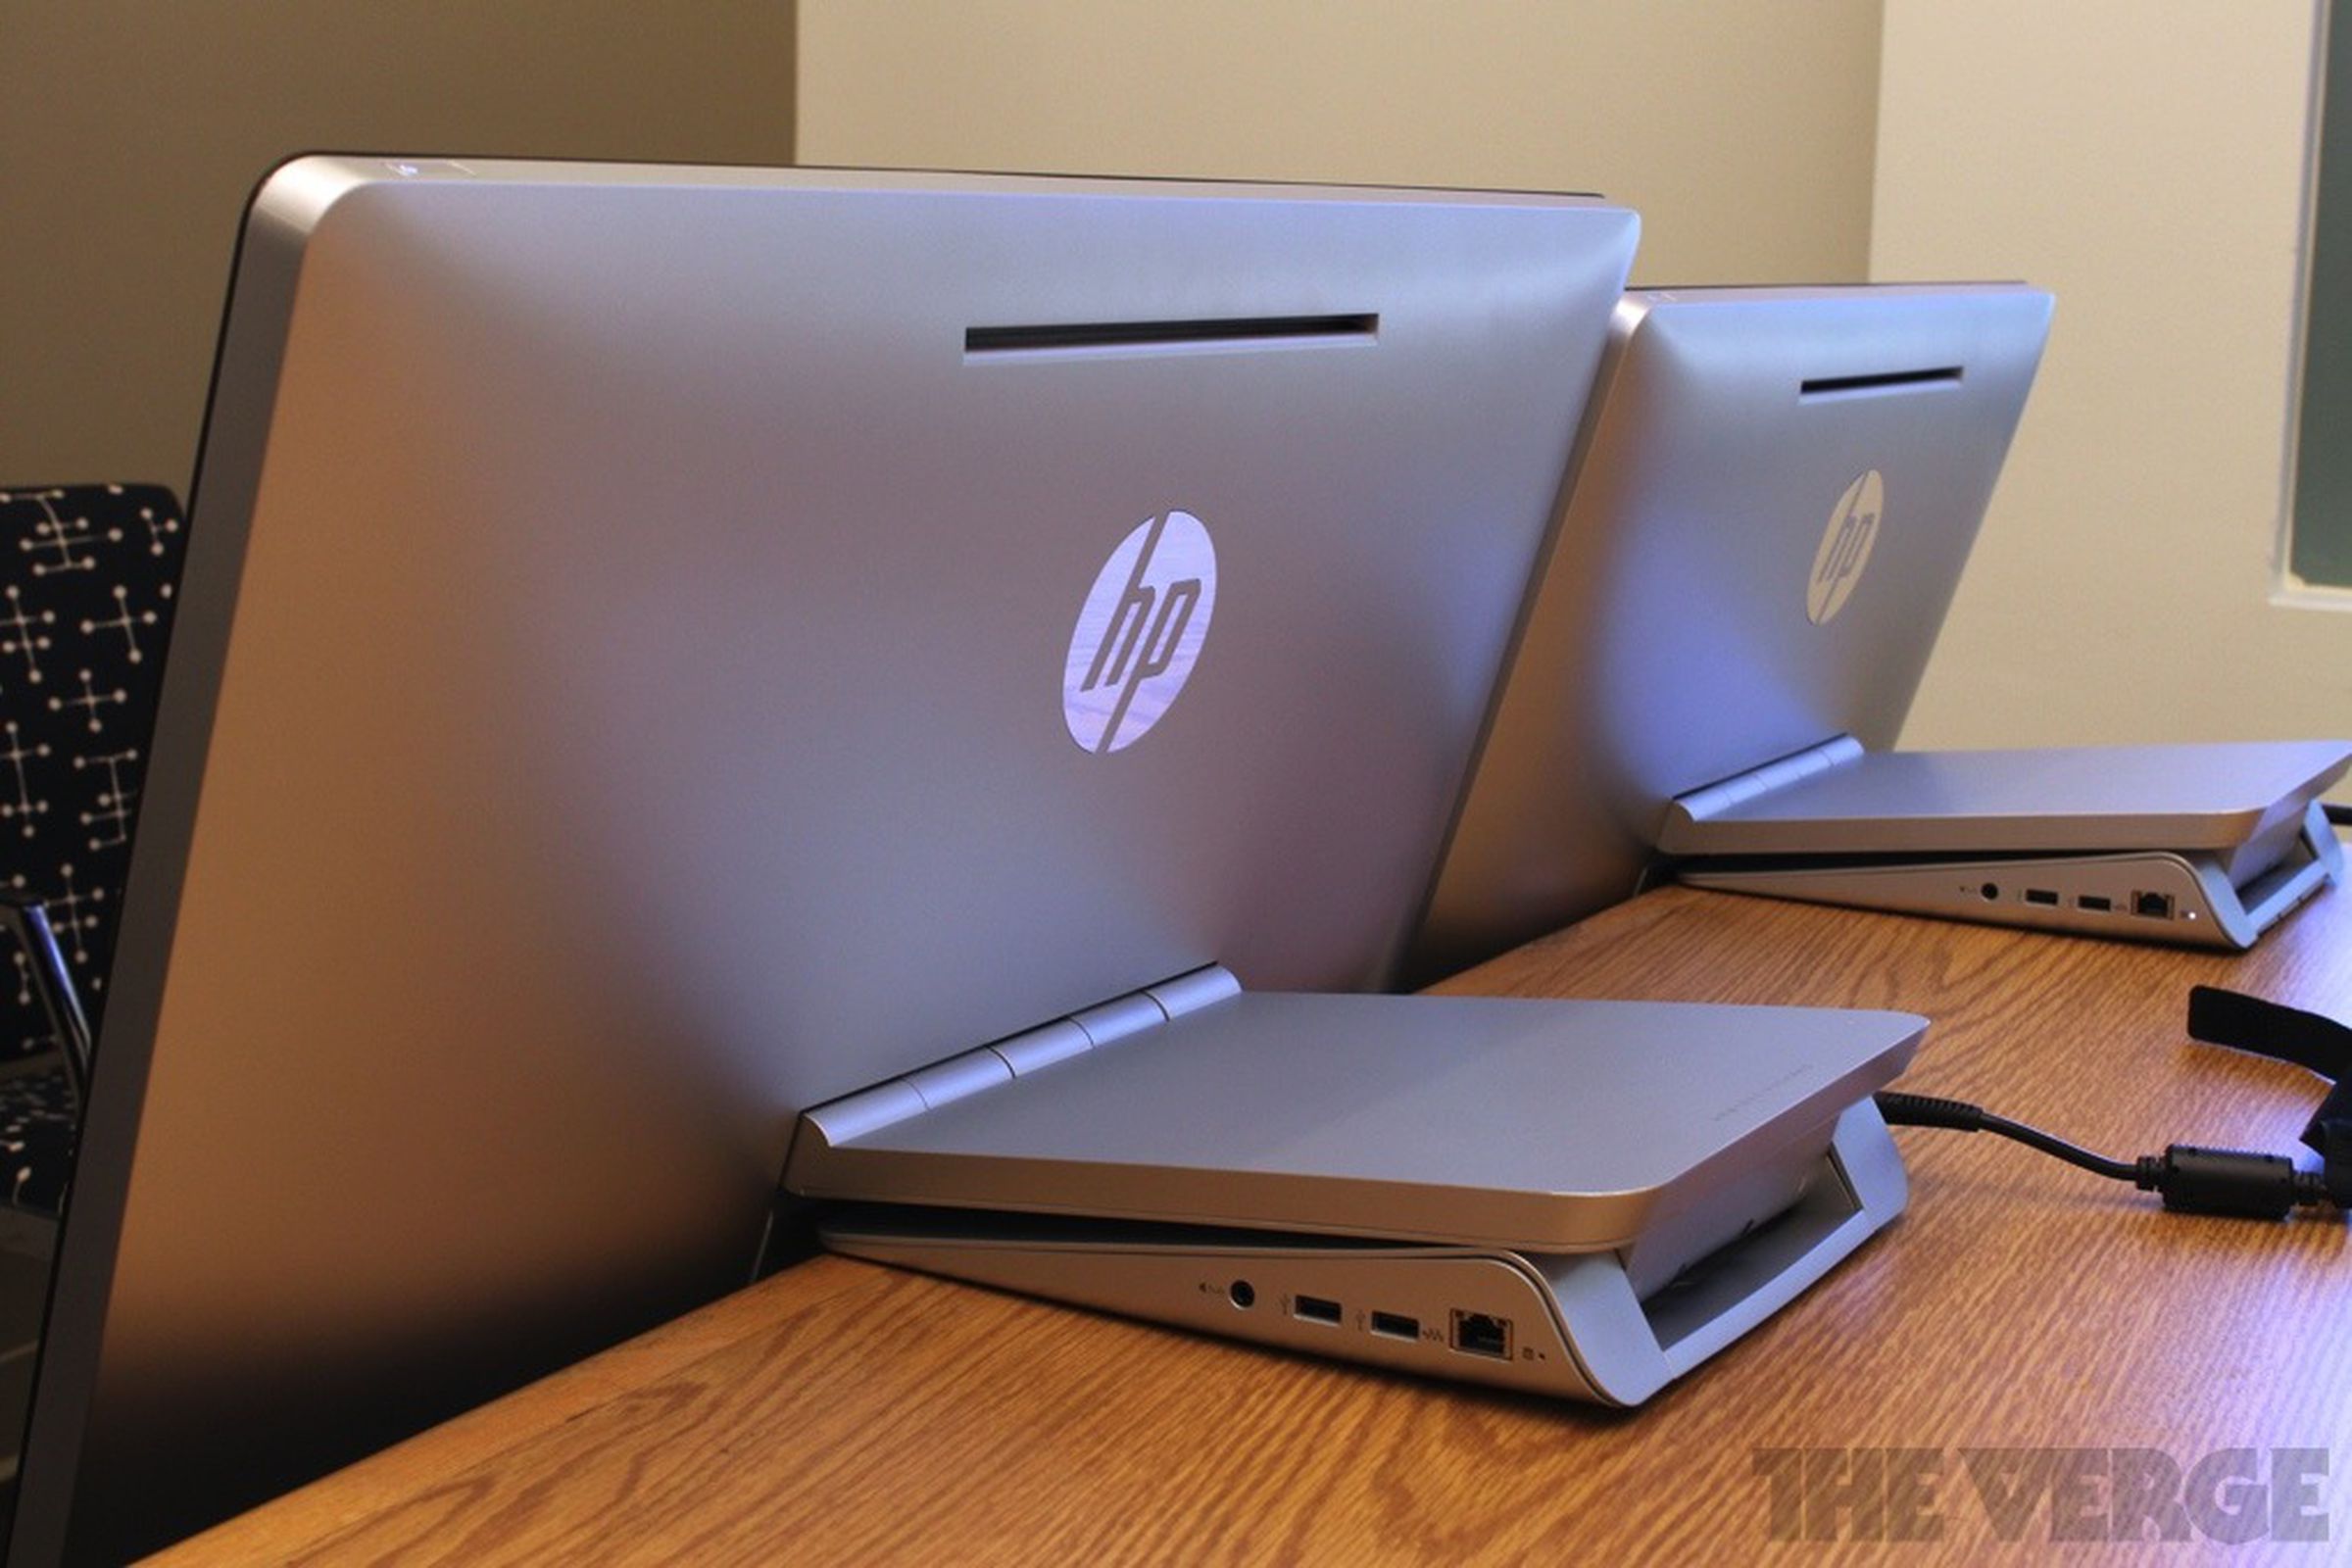 Gallery Photo: HP Envy 23 Recline and Envy 27 Recline hands-on pictures